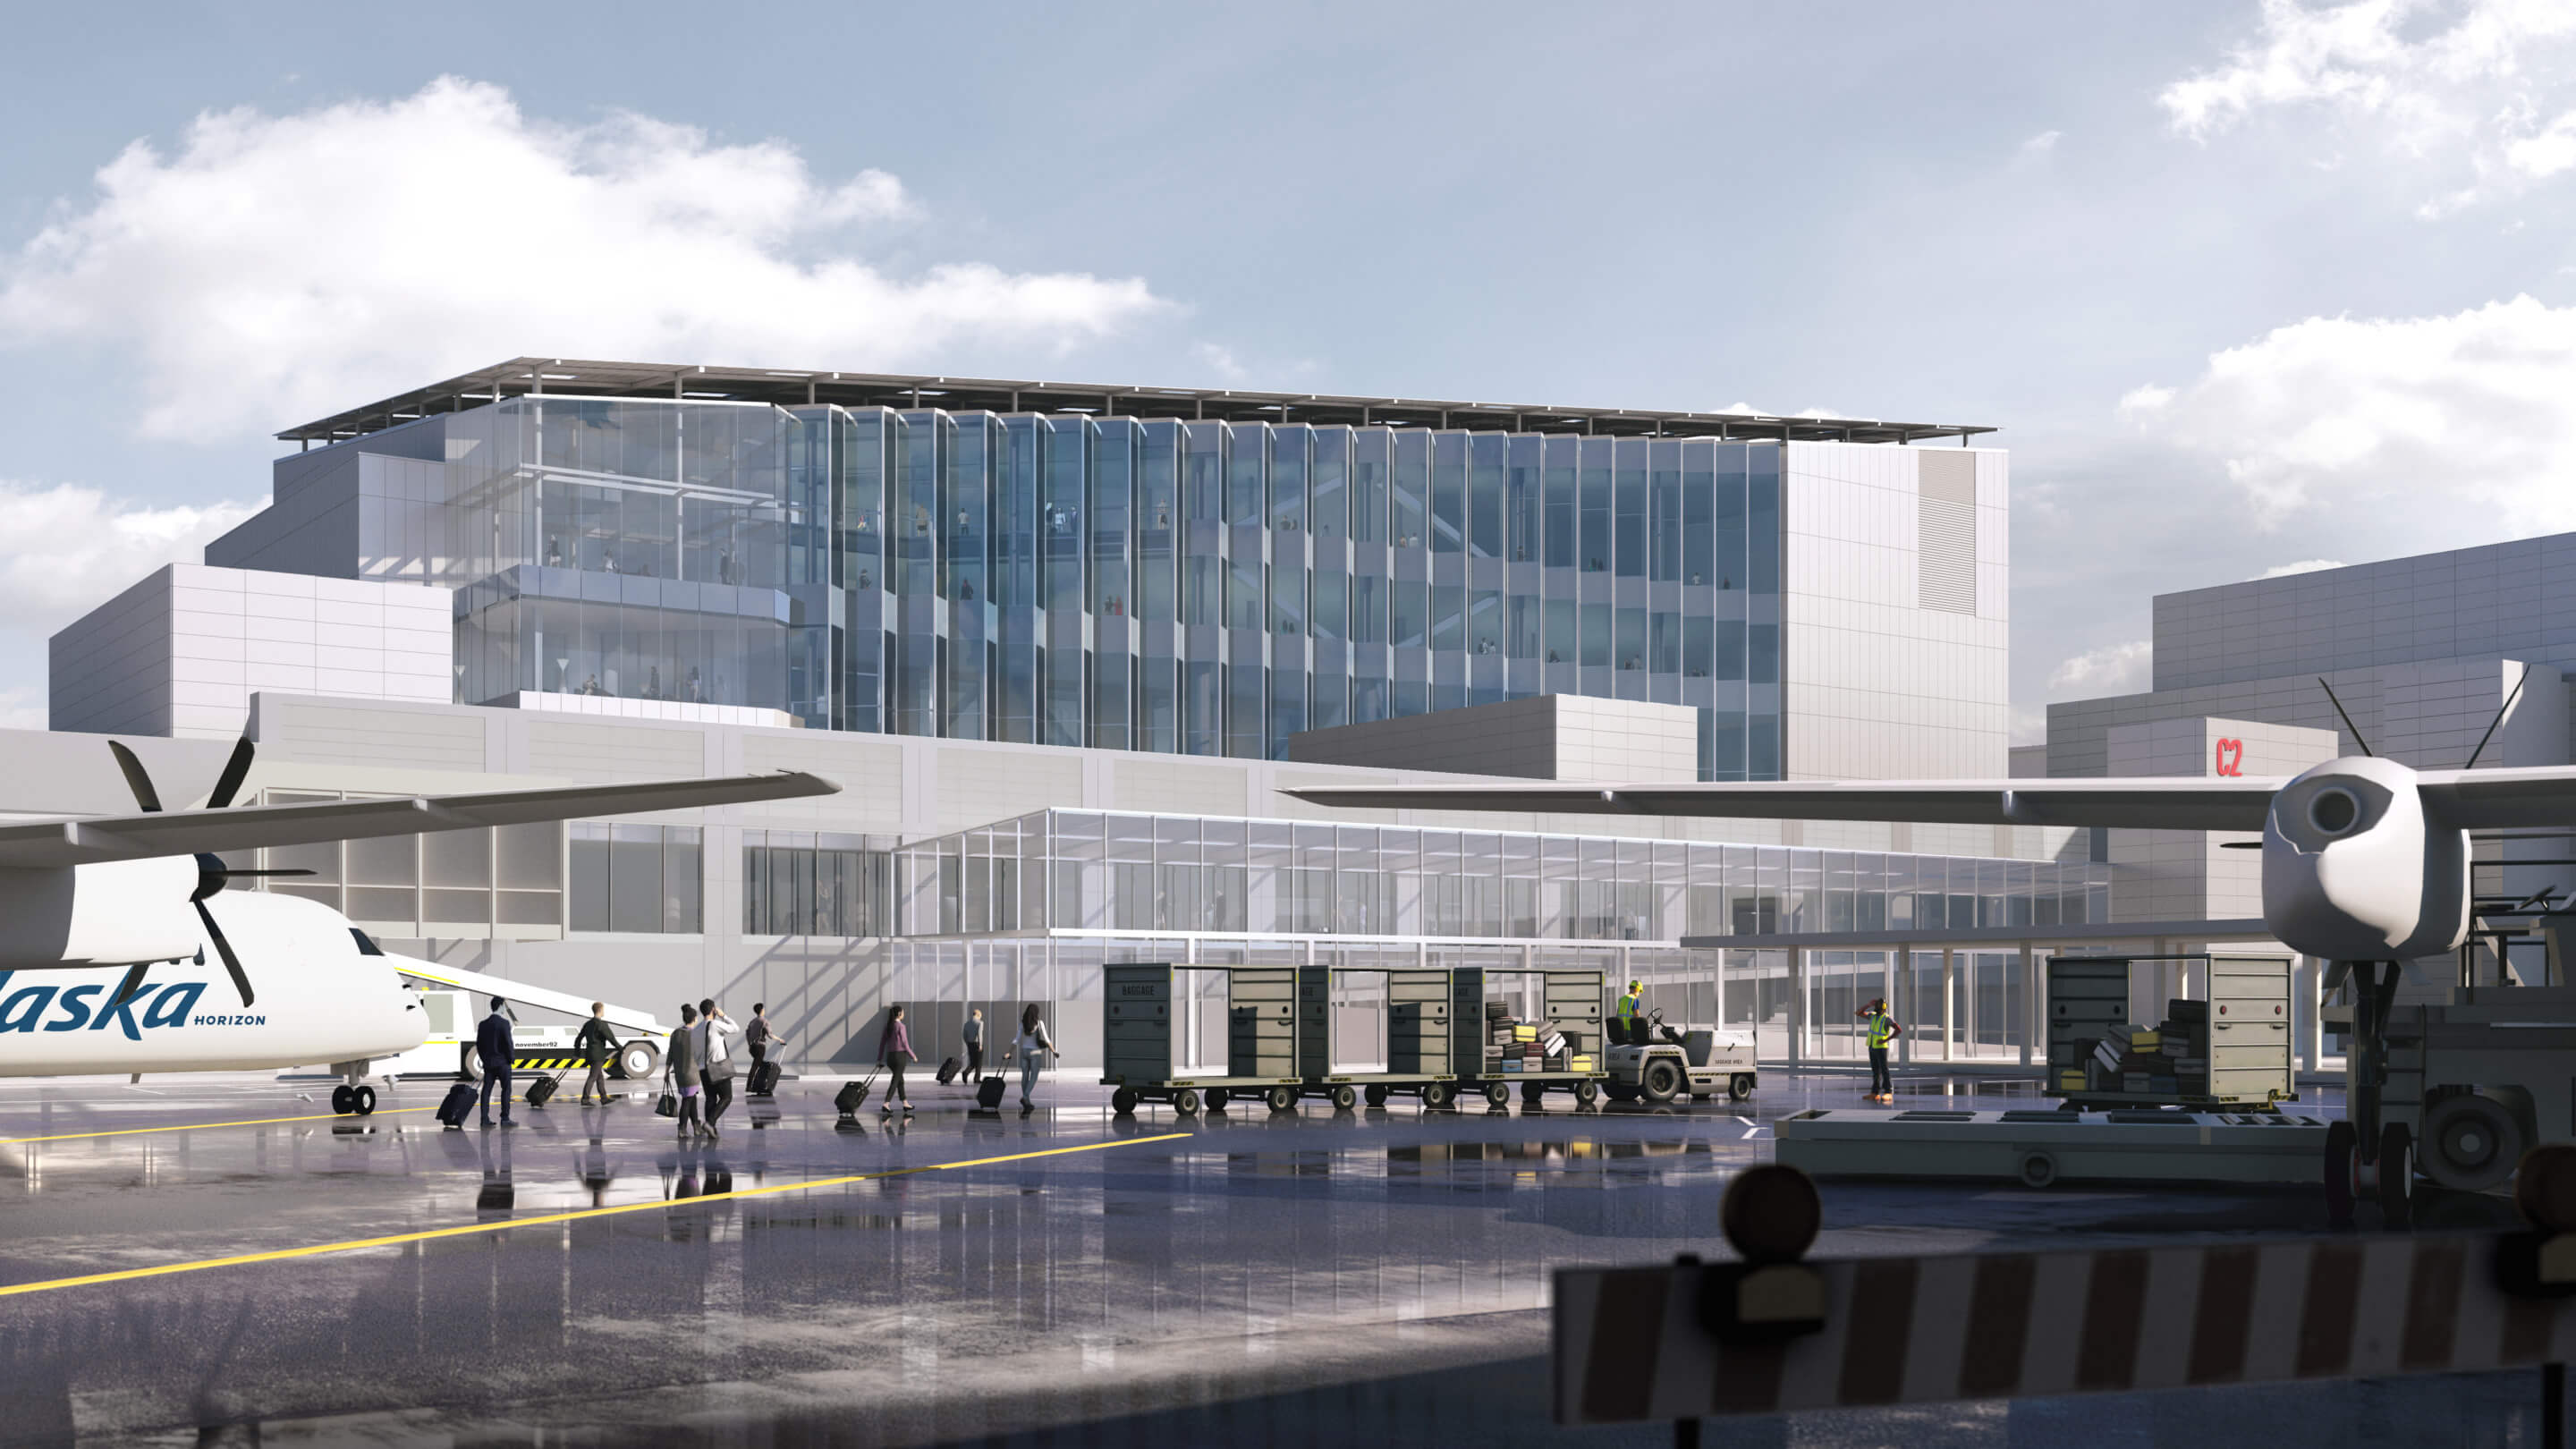 exterior rendering of an airport concourse